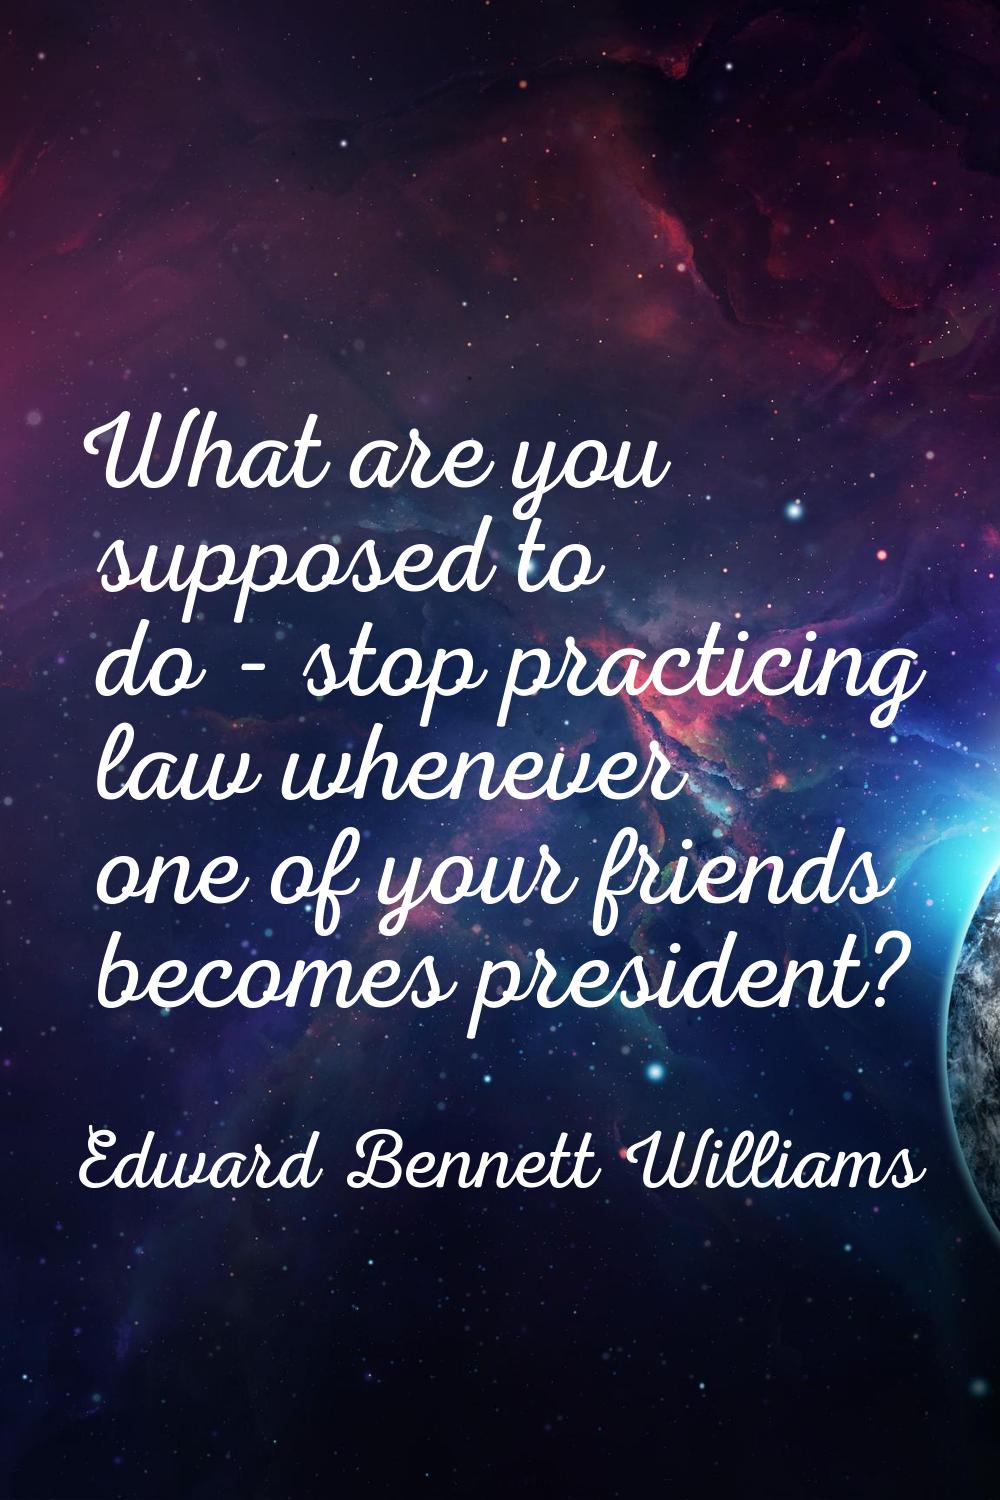 What are you supposed to do - stop practicing law whenever one of your friends becomes president?